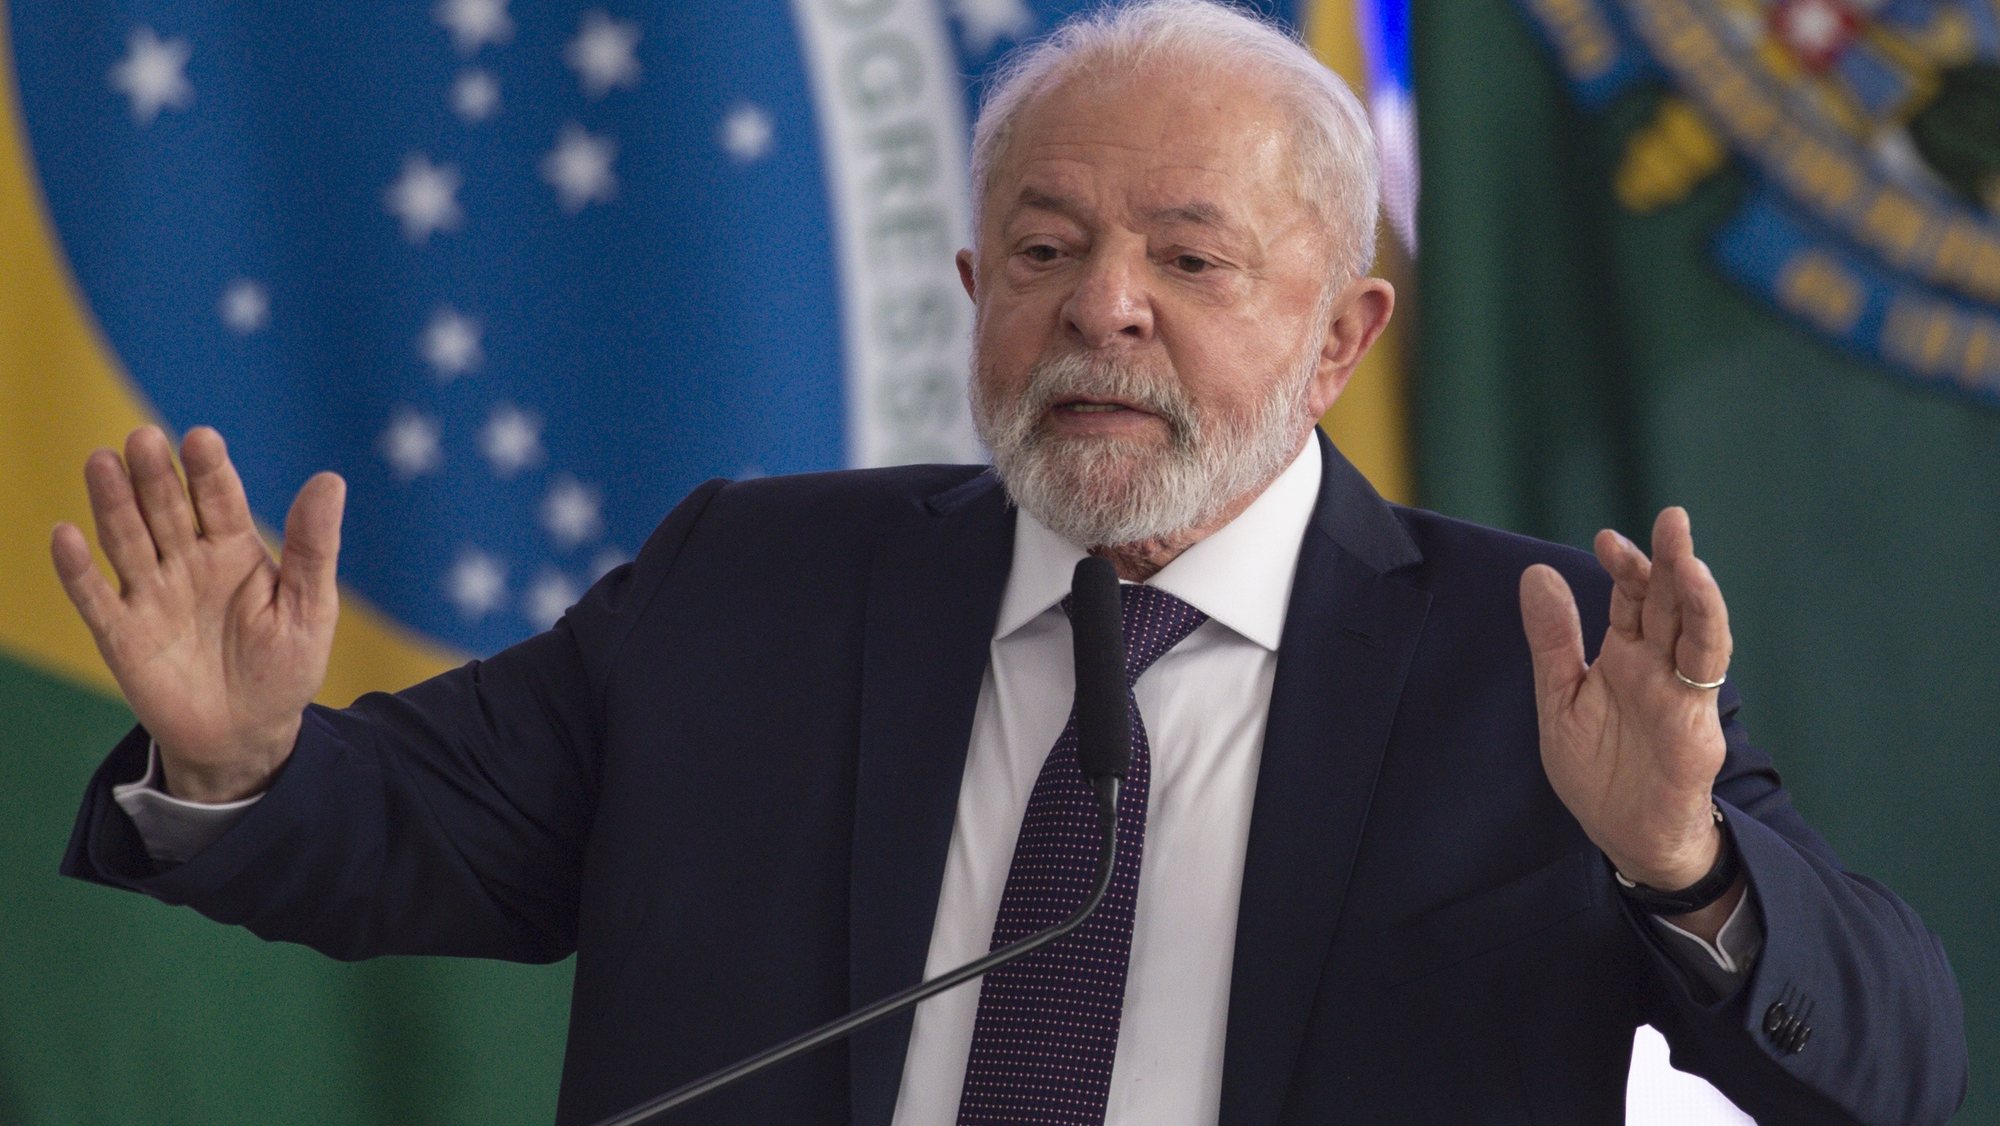 epa10760829 A handout photo made available by Agencia Brasil showing Brazilian President Luiz Inacio Lula da Silva during an announcement at the Planalto Palace in Brasilia, Brazil, 21 July 2023. Lula da Silva spoke about a set of measures to strengthen public security, including a specific plan to combat the growing violence in the Amazon, restrictions on the sale of weapons and more drastic regulations against armed attacks in schools.  EPA/Marcelo Camargo / HANDOUT  HANDOUT EDITORIAL USE ONLY/NO SALES/NO ARCHIVES